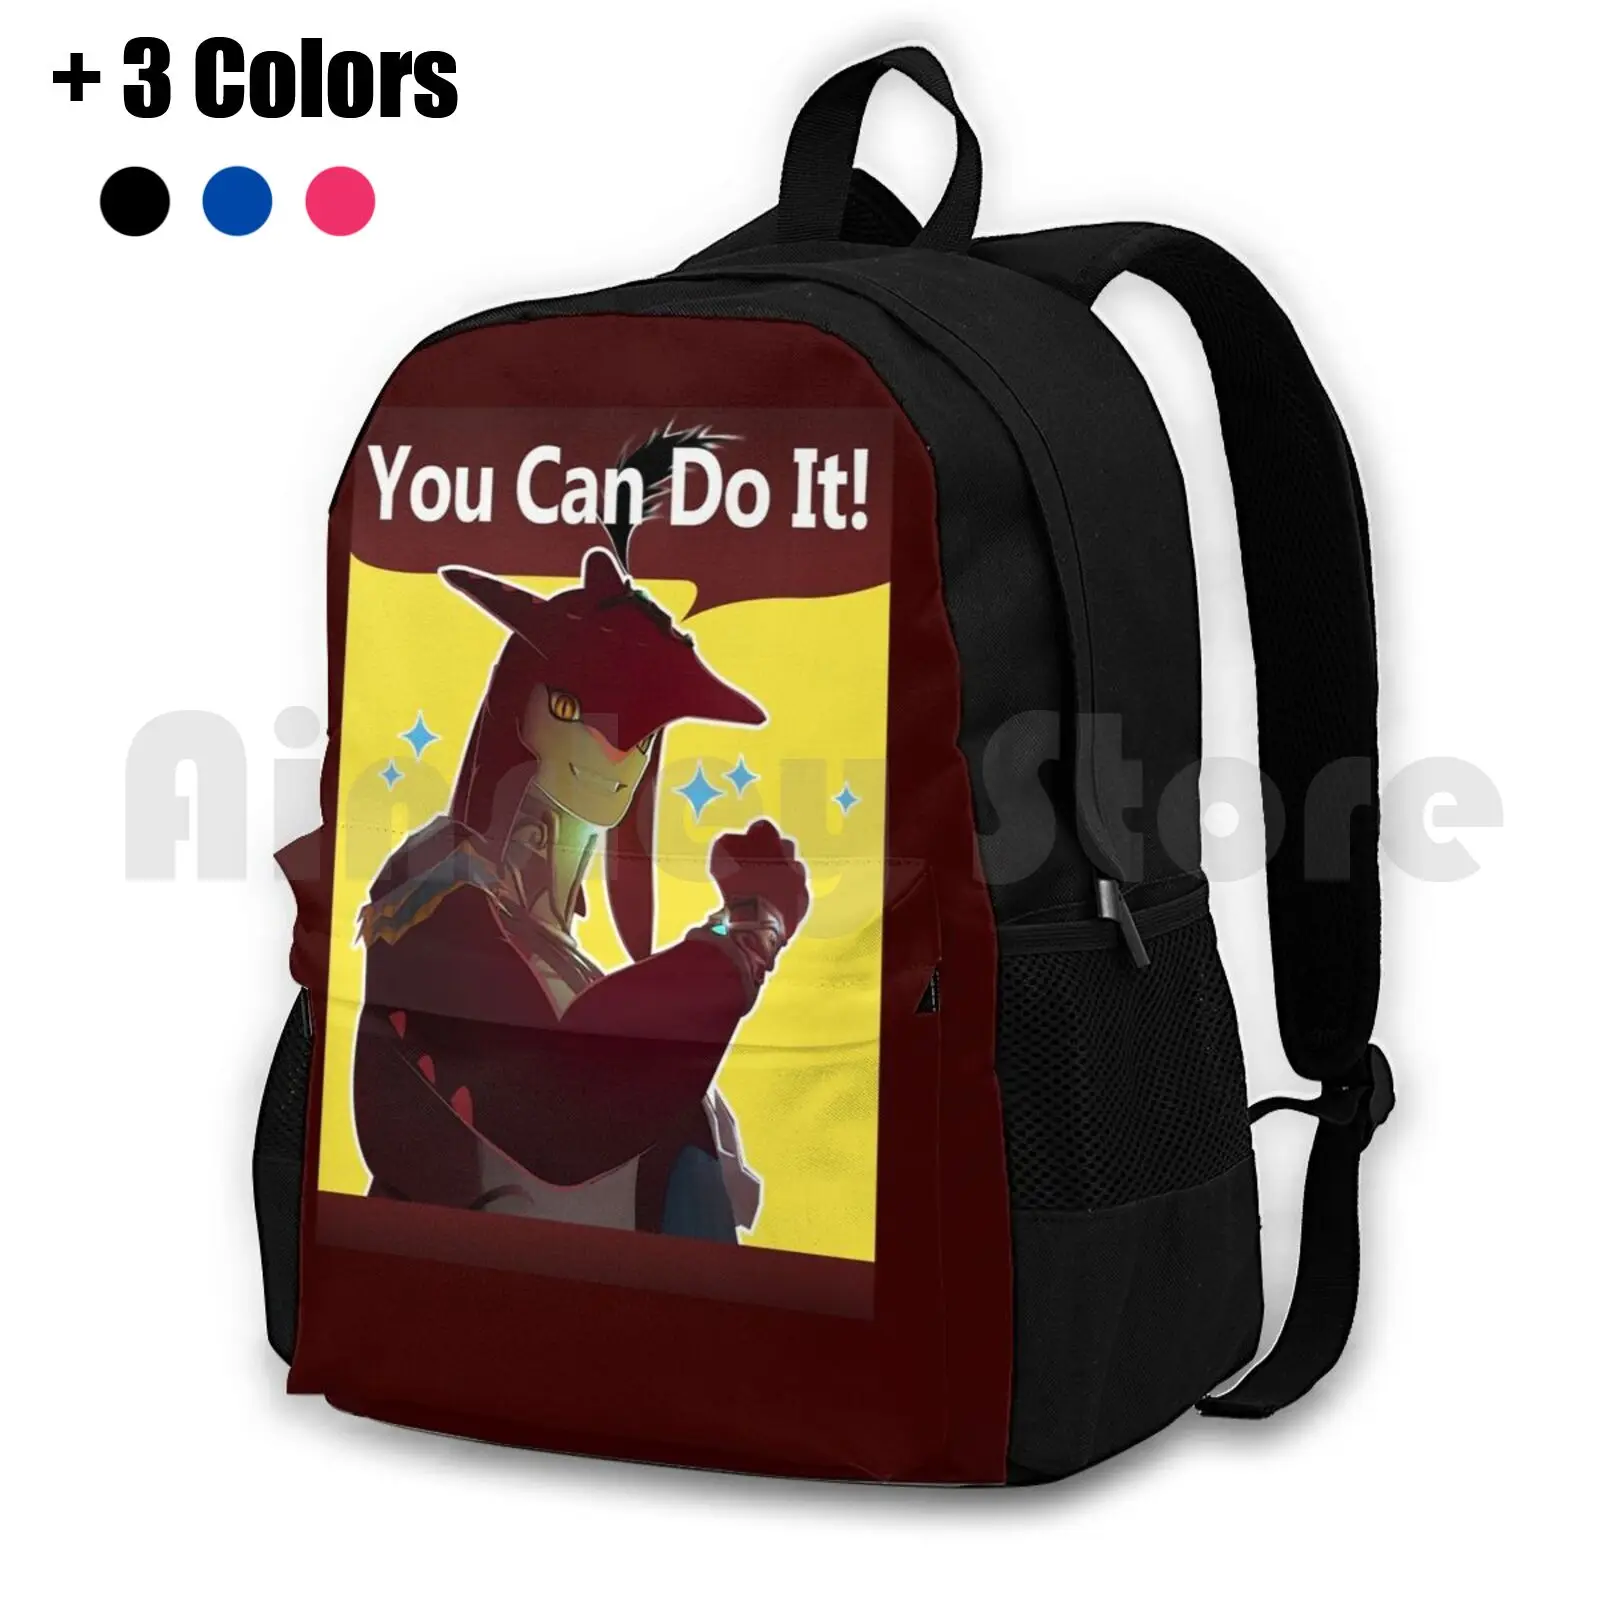 

You Can Do It! Outdoor Hiking Backpack Waterproof Camping Travel The Legend Of Breath Of The Wild Breath Wild Sidon Prince